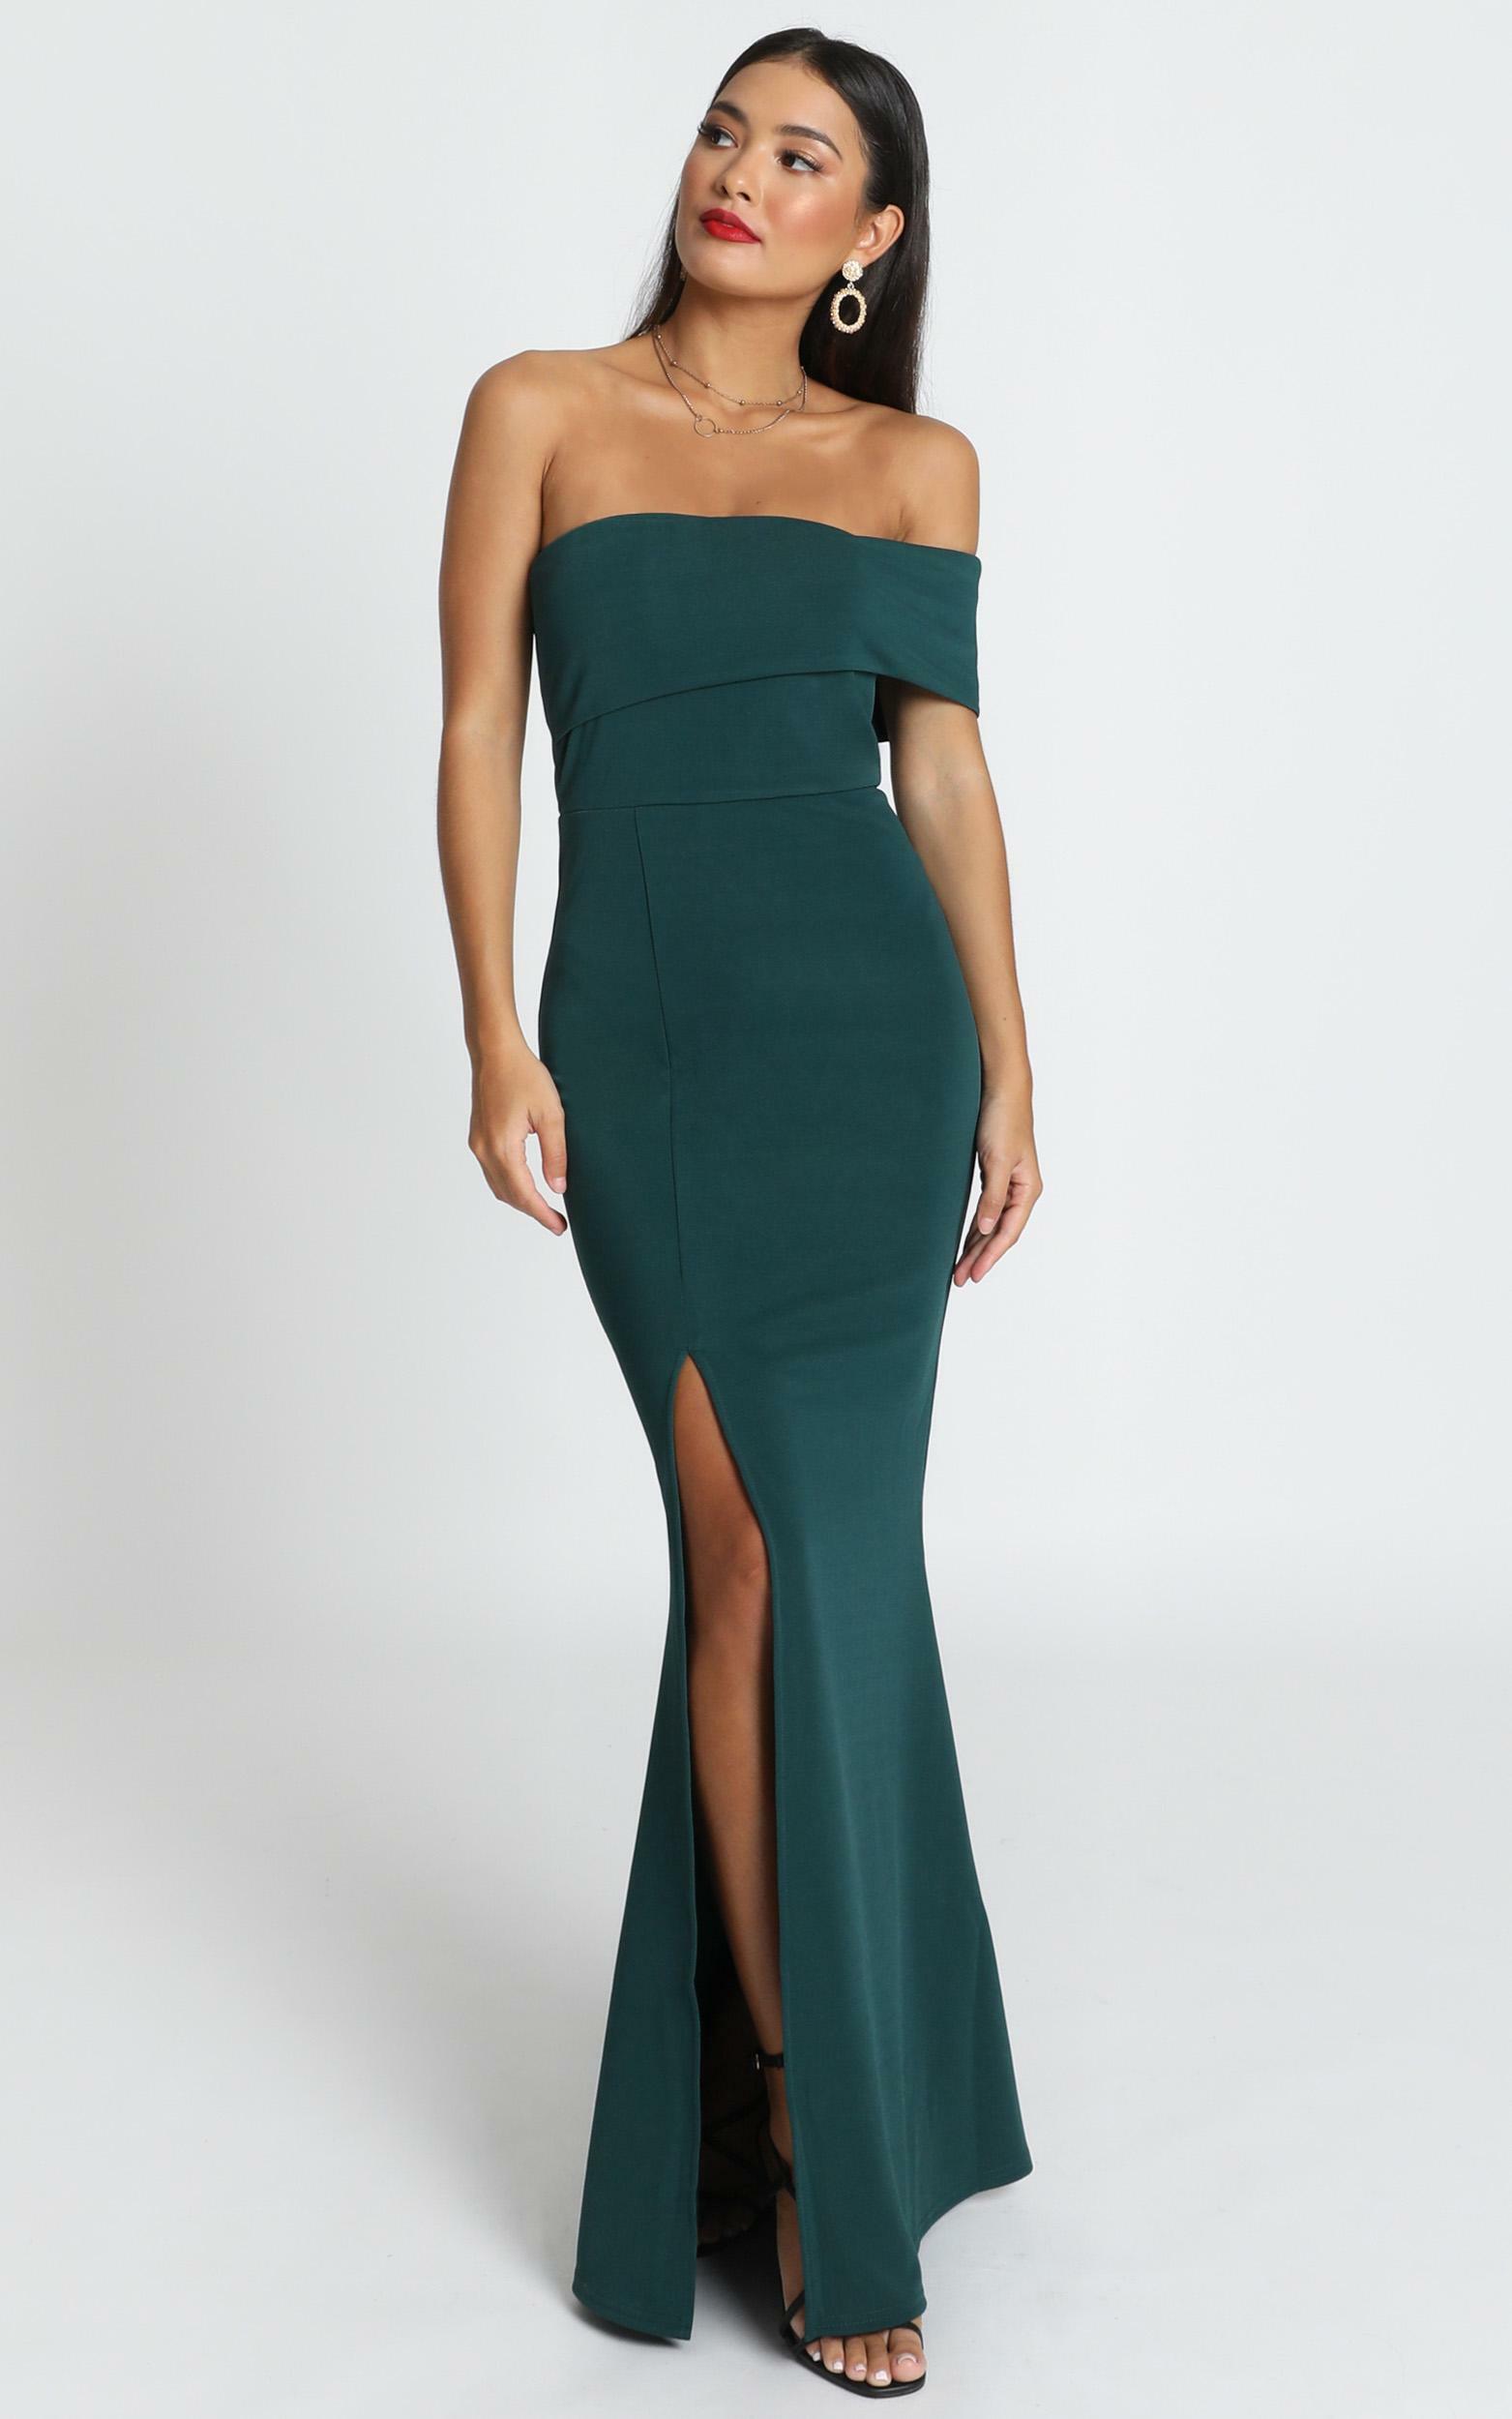 Glamour Girl Maxi Dress in Emerald - 04, GRN2, hi-res image number null